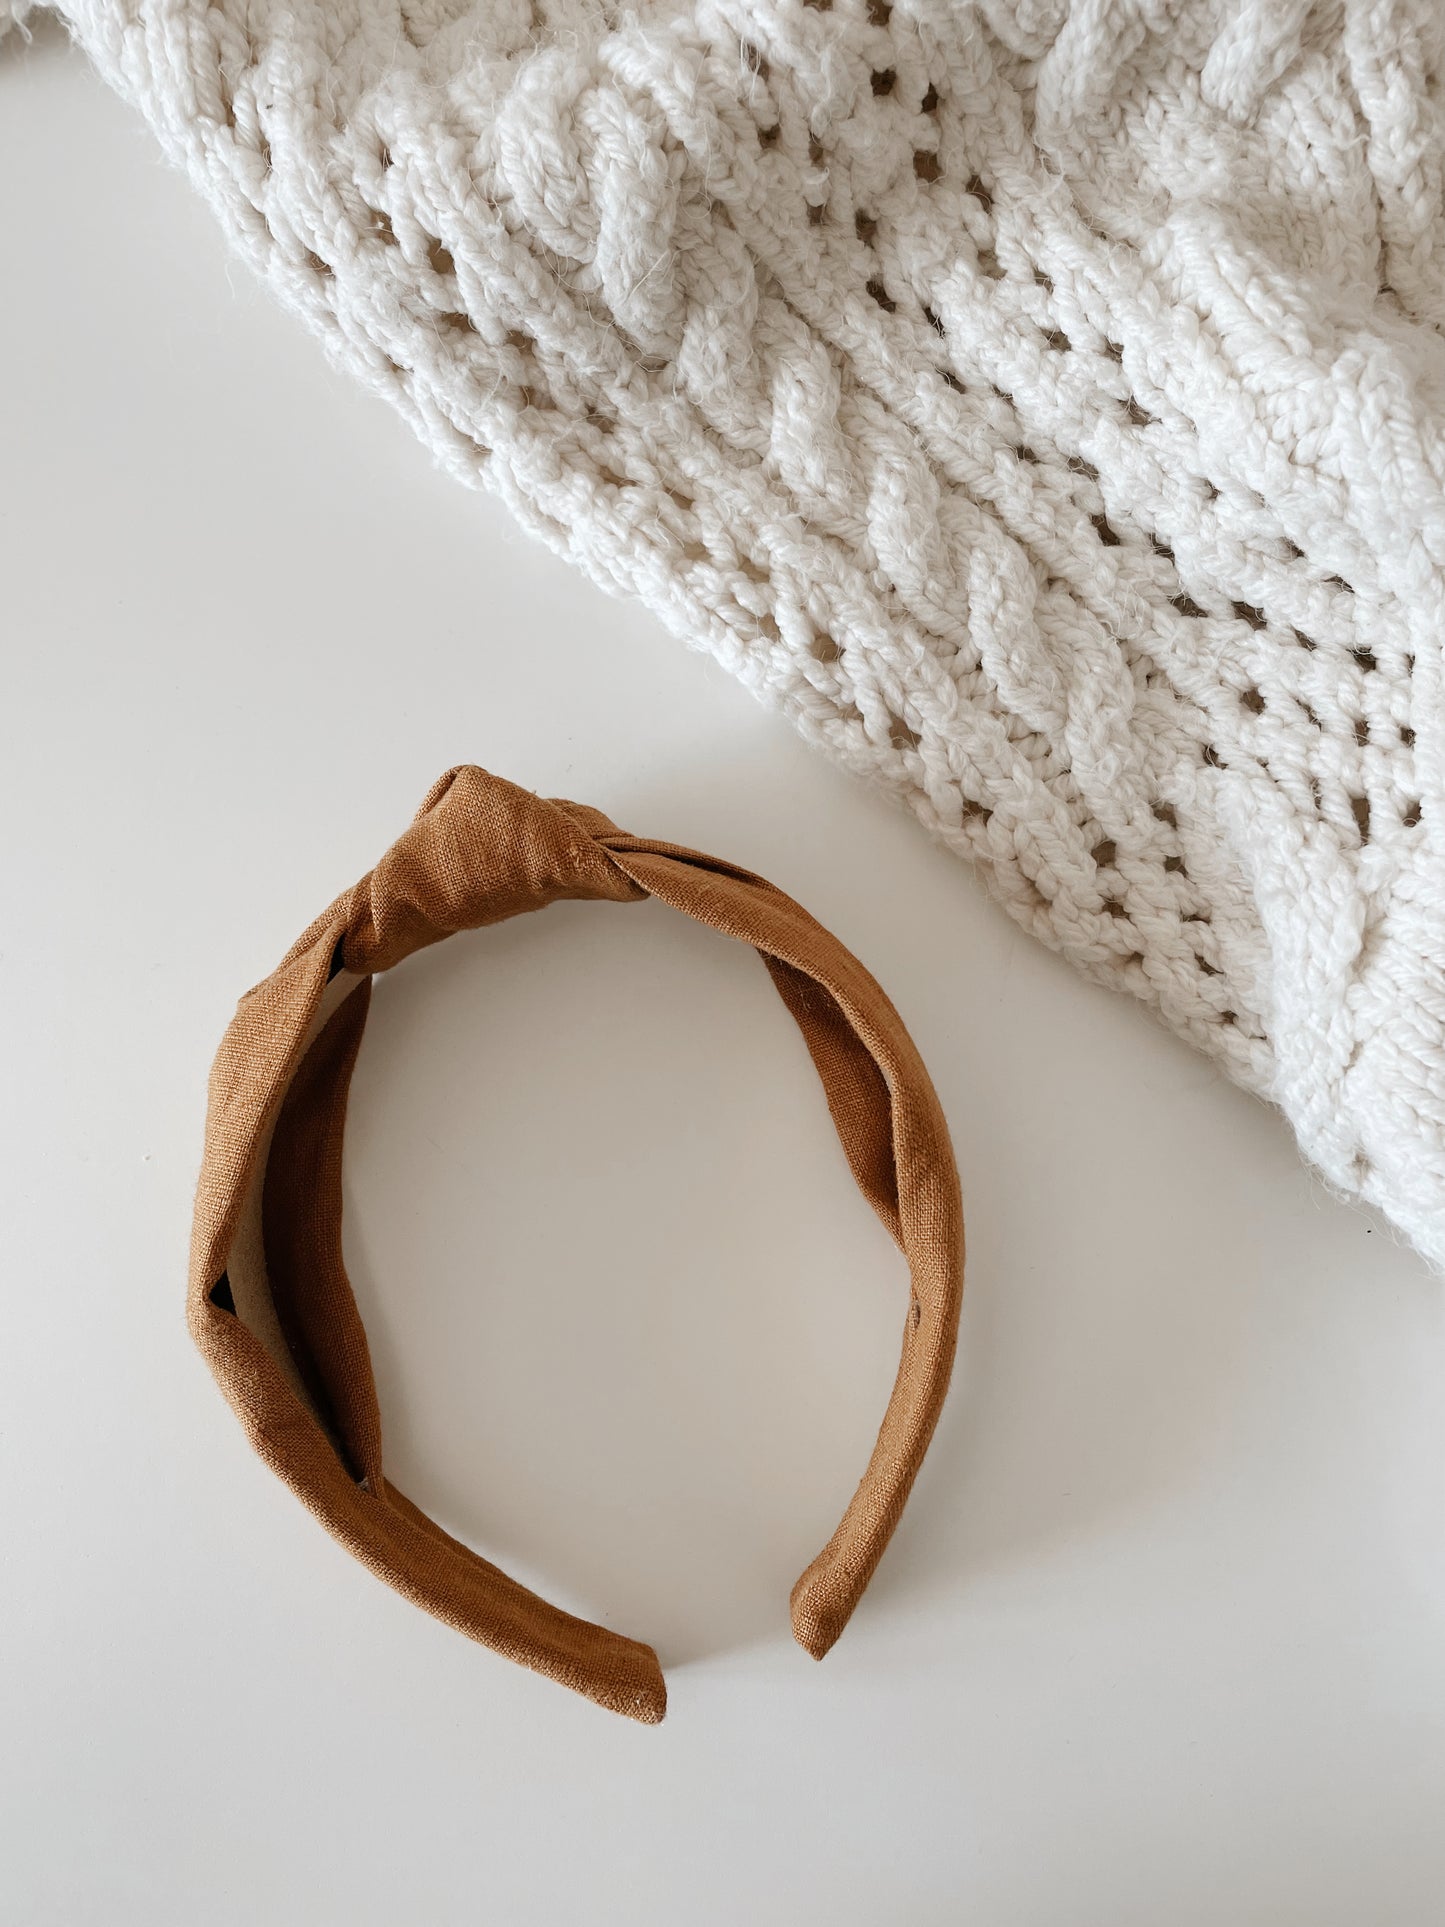 Ginger Knotted Headband